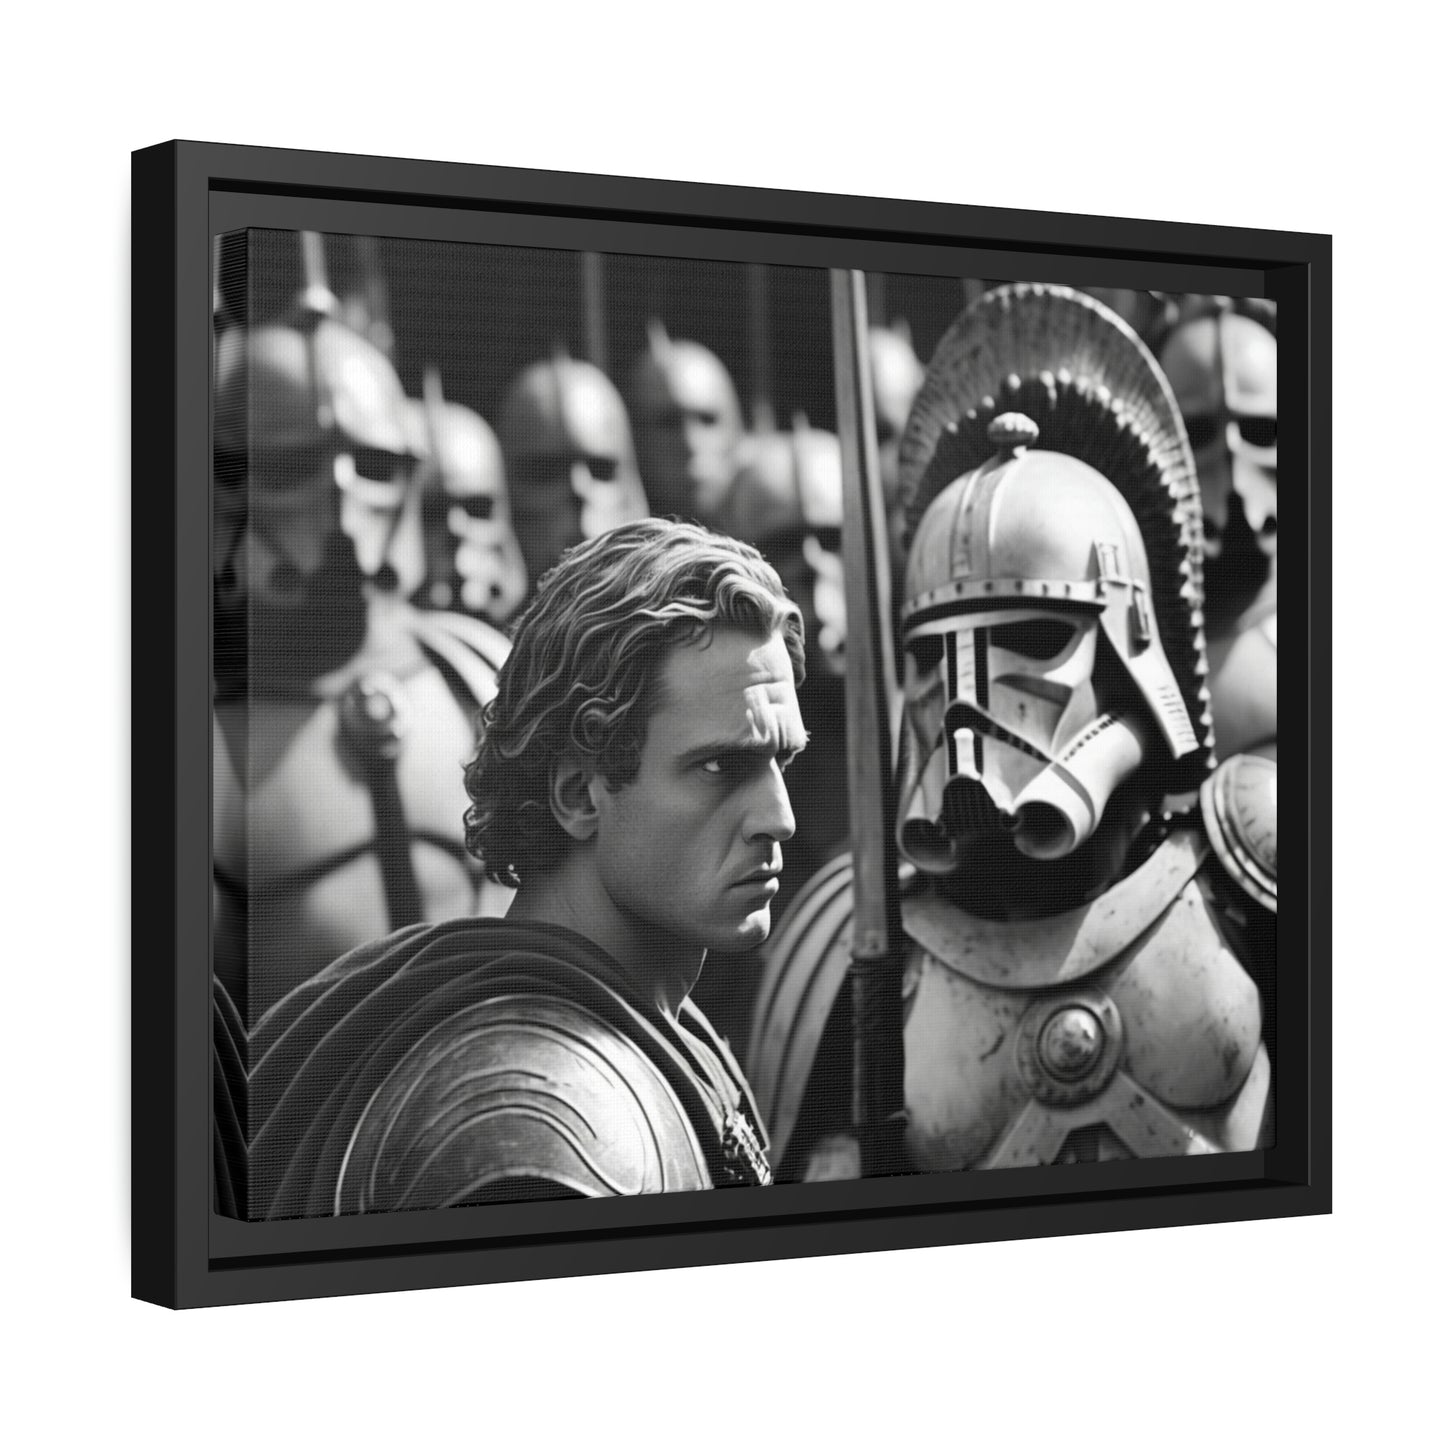 Alexander the Great, Stormtroopers: Canvas Art